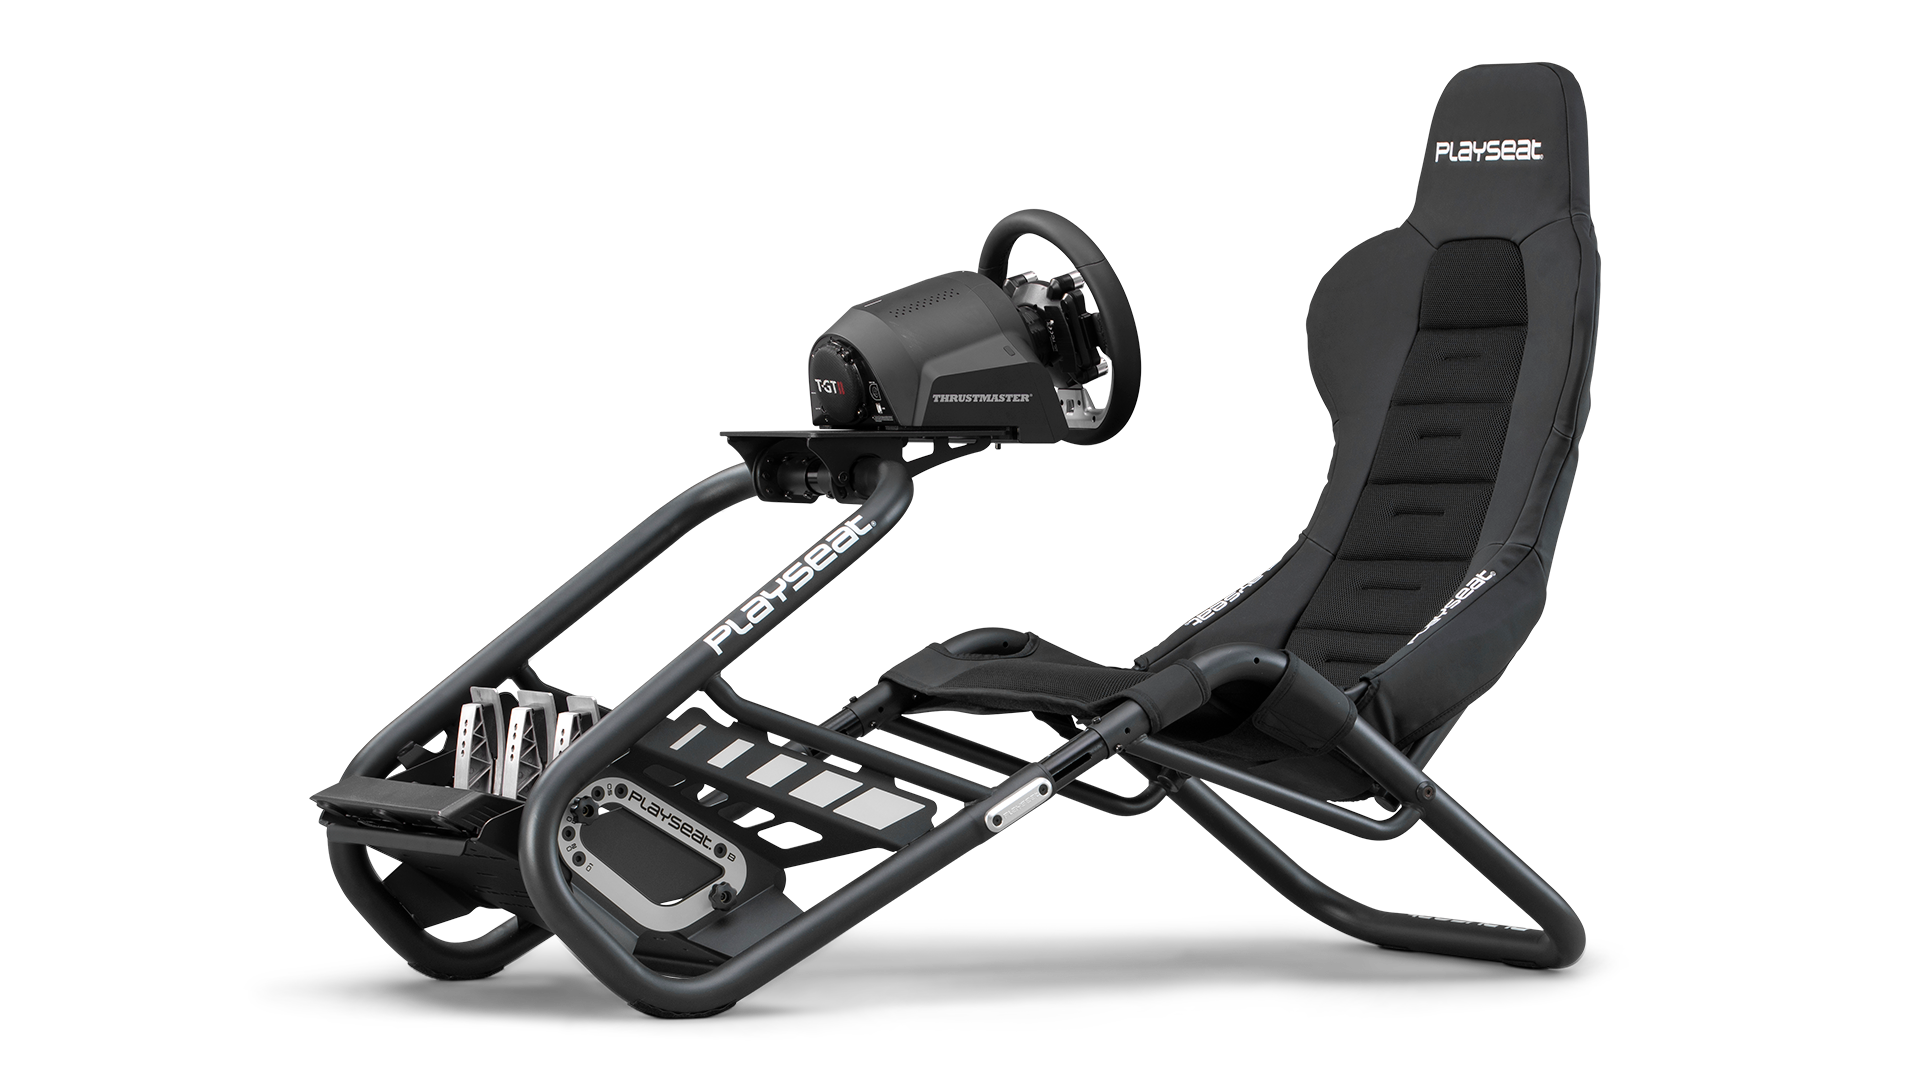 playseat-trophy-black-direct-drive-simulator-front-angle-view-thrustmaster-1920x1080-5.png